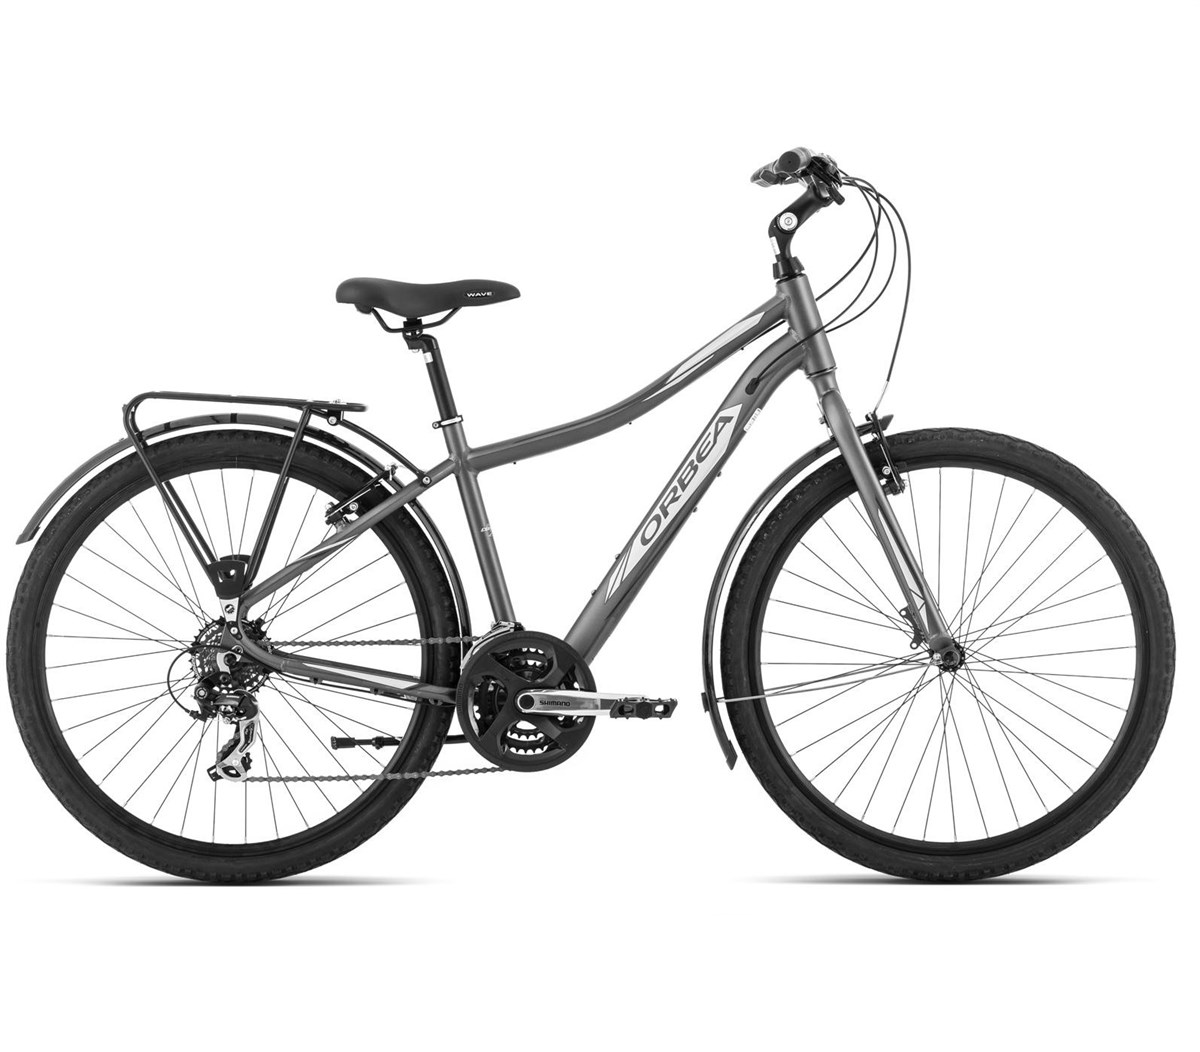 Orbea Comfort 28 20 Entrance Equipped  2015 - Hybrid Sports Bike product image